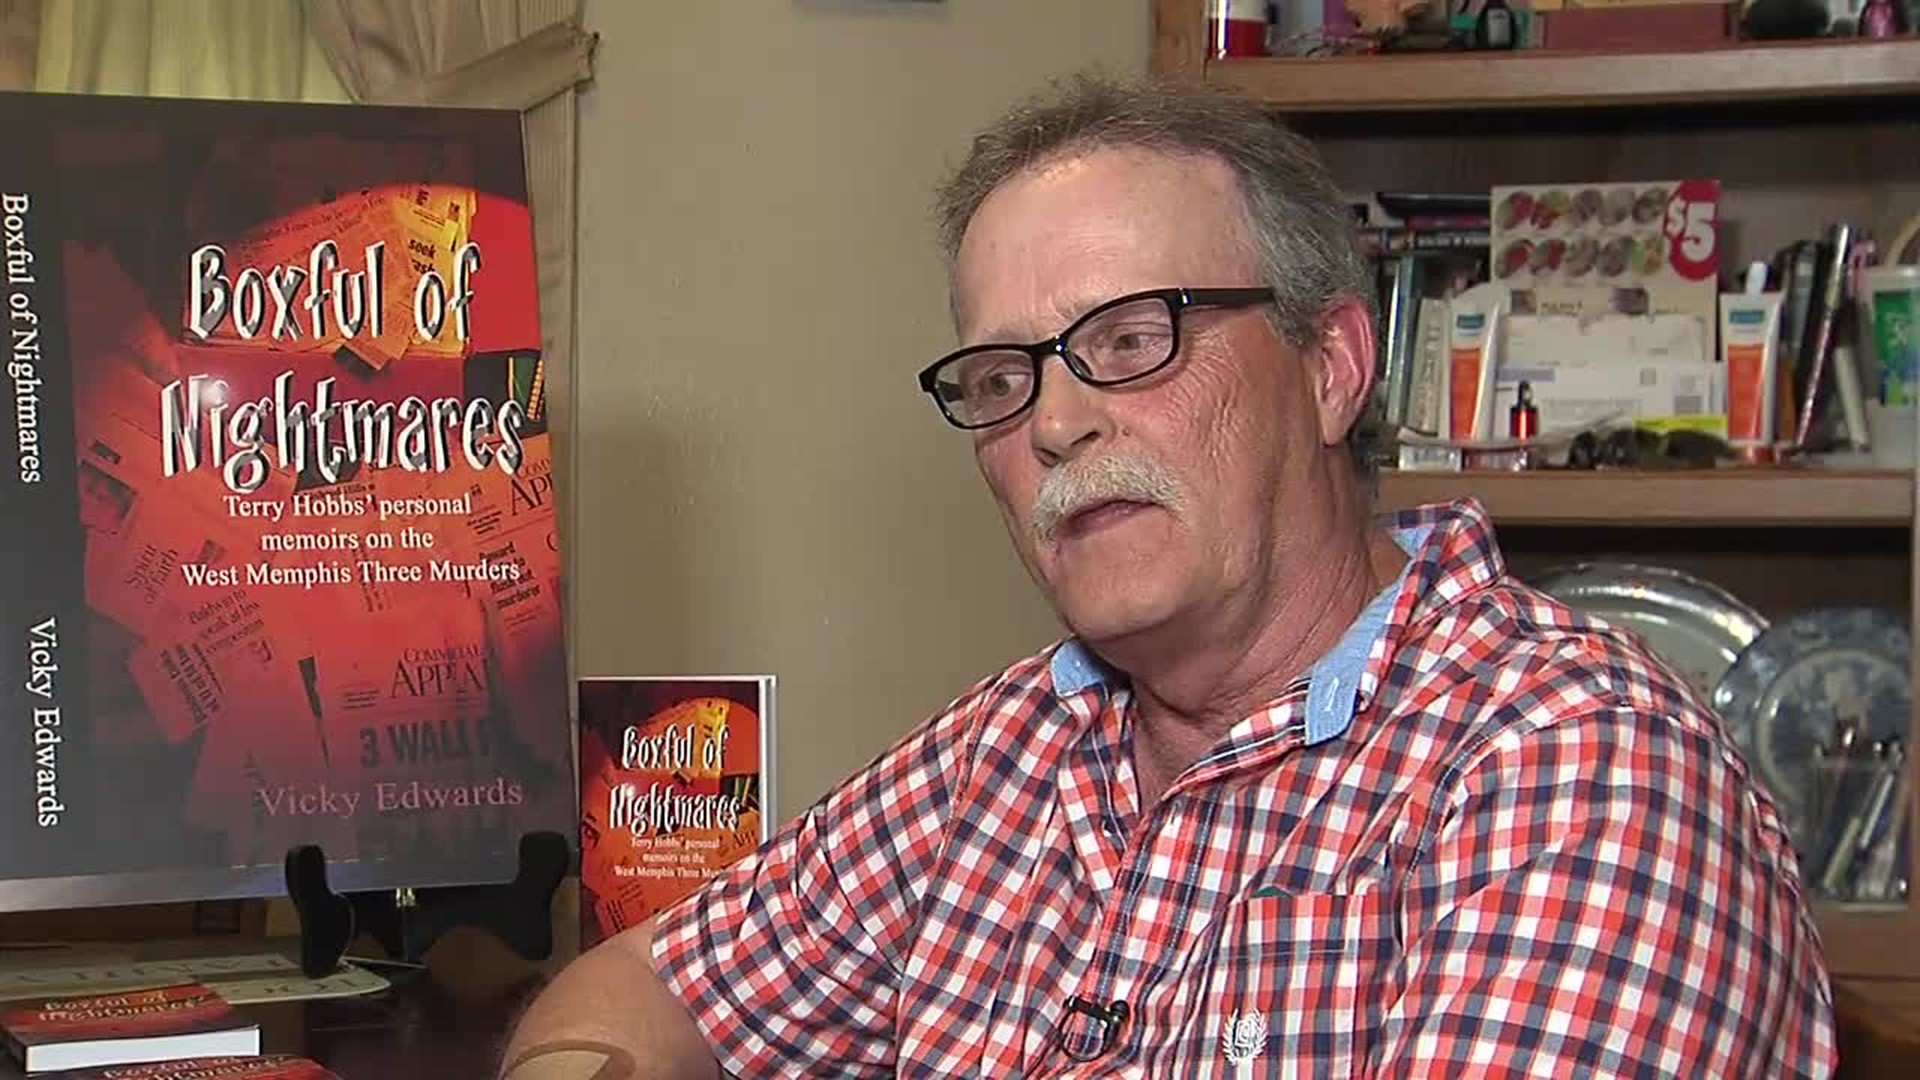 WEB EXTRA: More from Terry Hobbs on his book & music